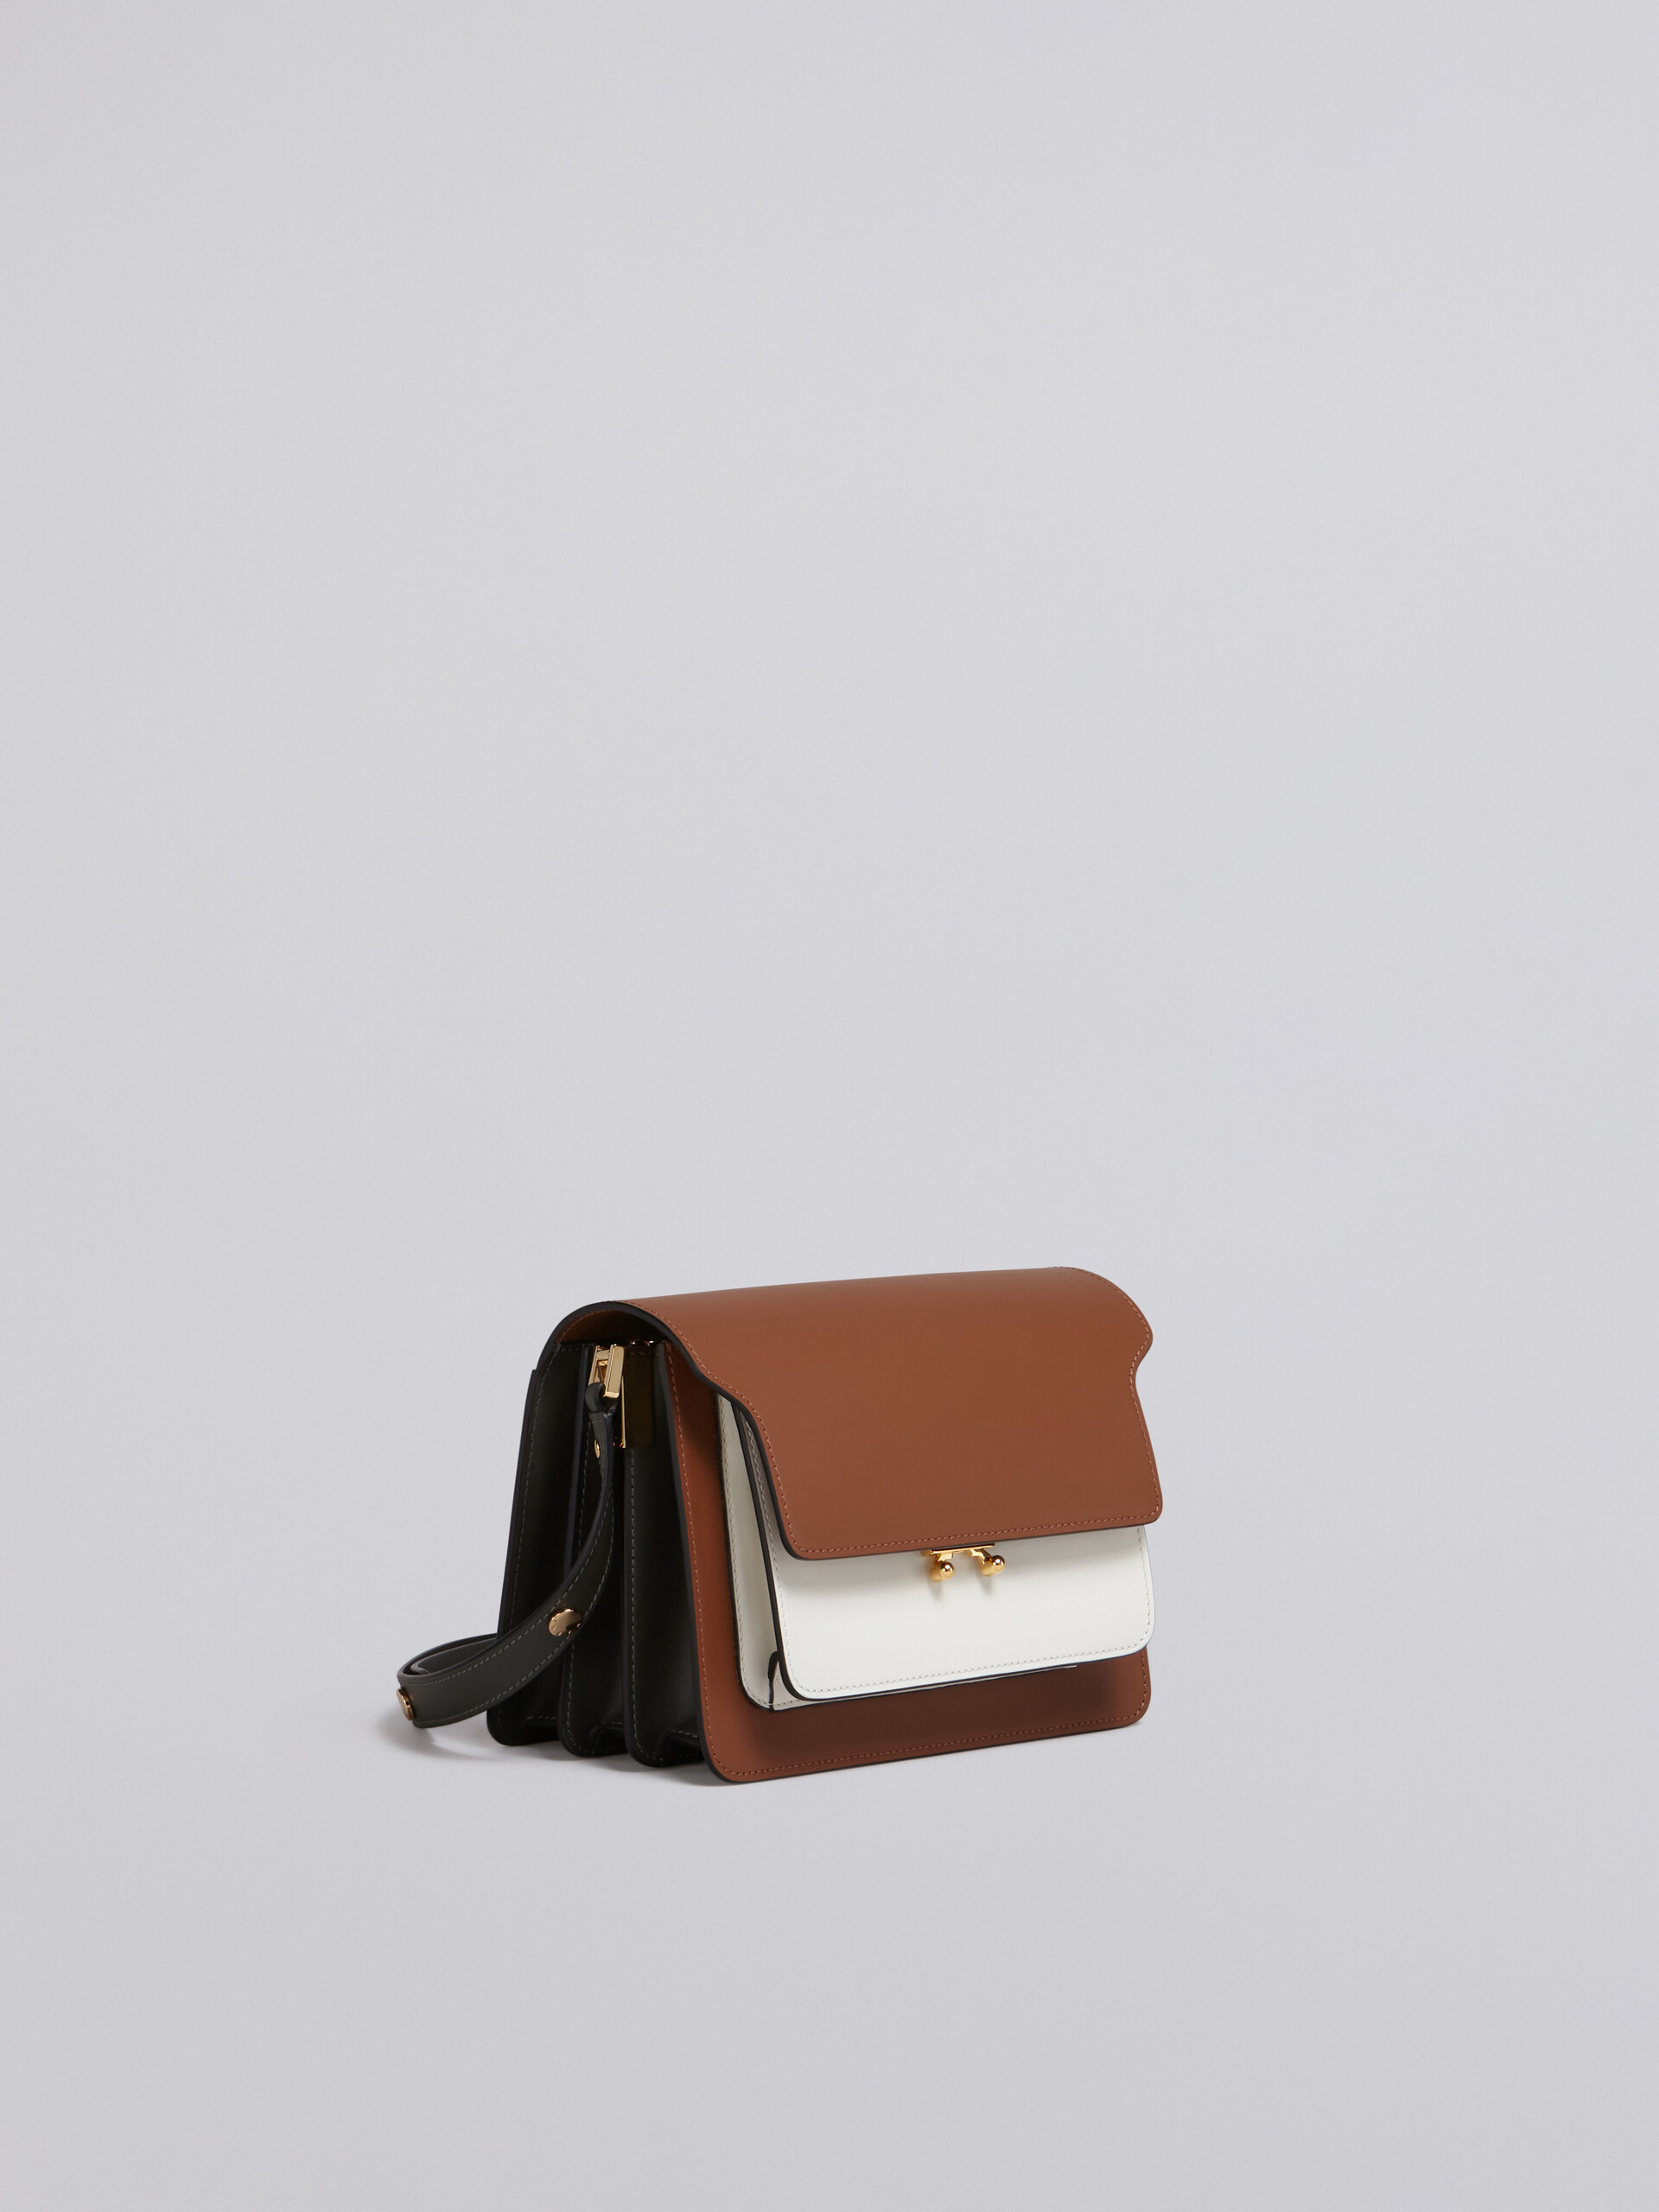 TRUNK media bag in brown white and green leather - Shoulder Bags - Image 5